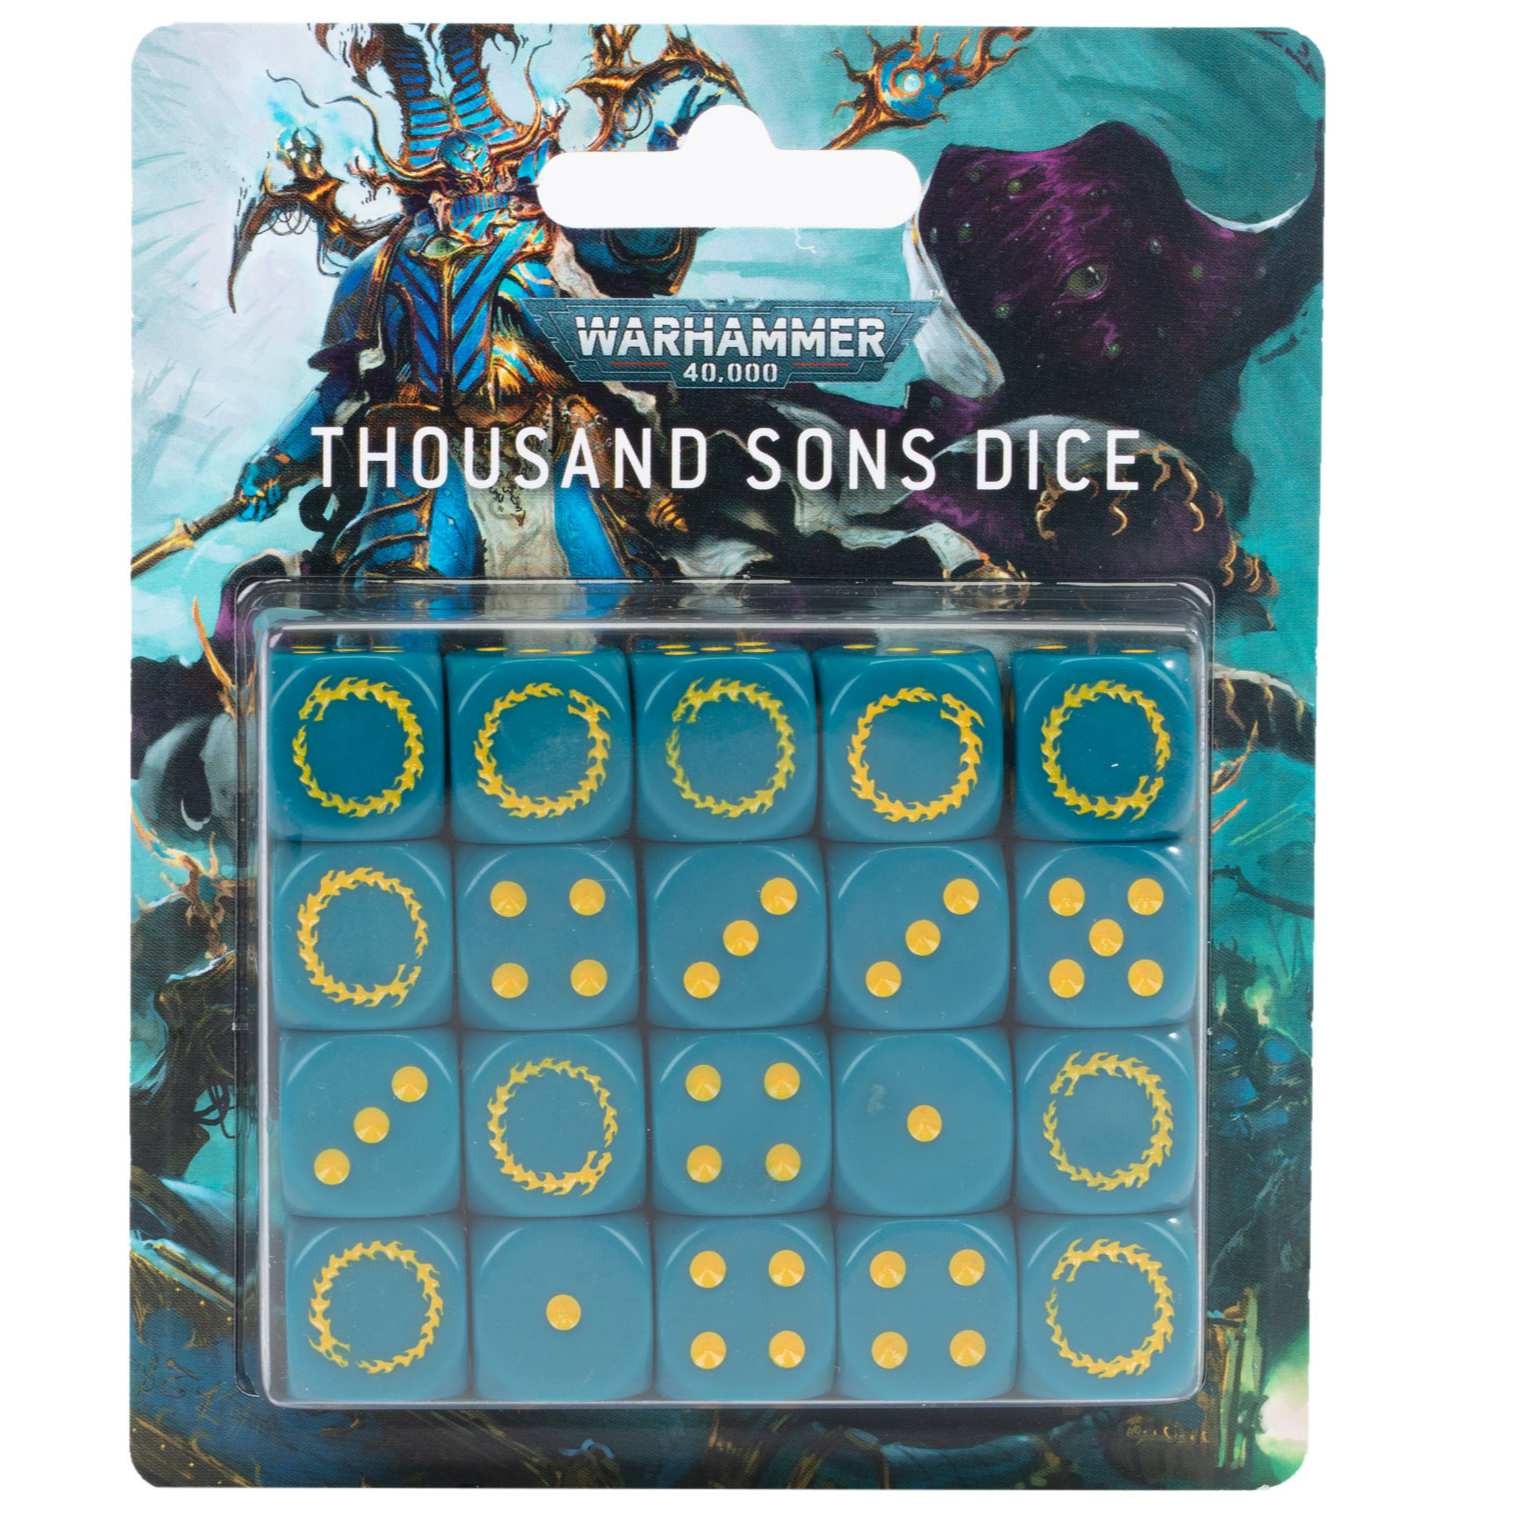 Thousand Sons Dice